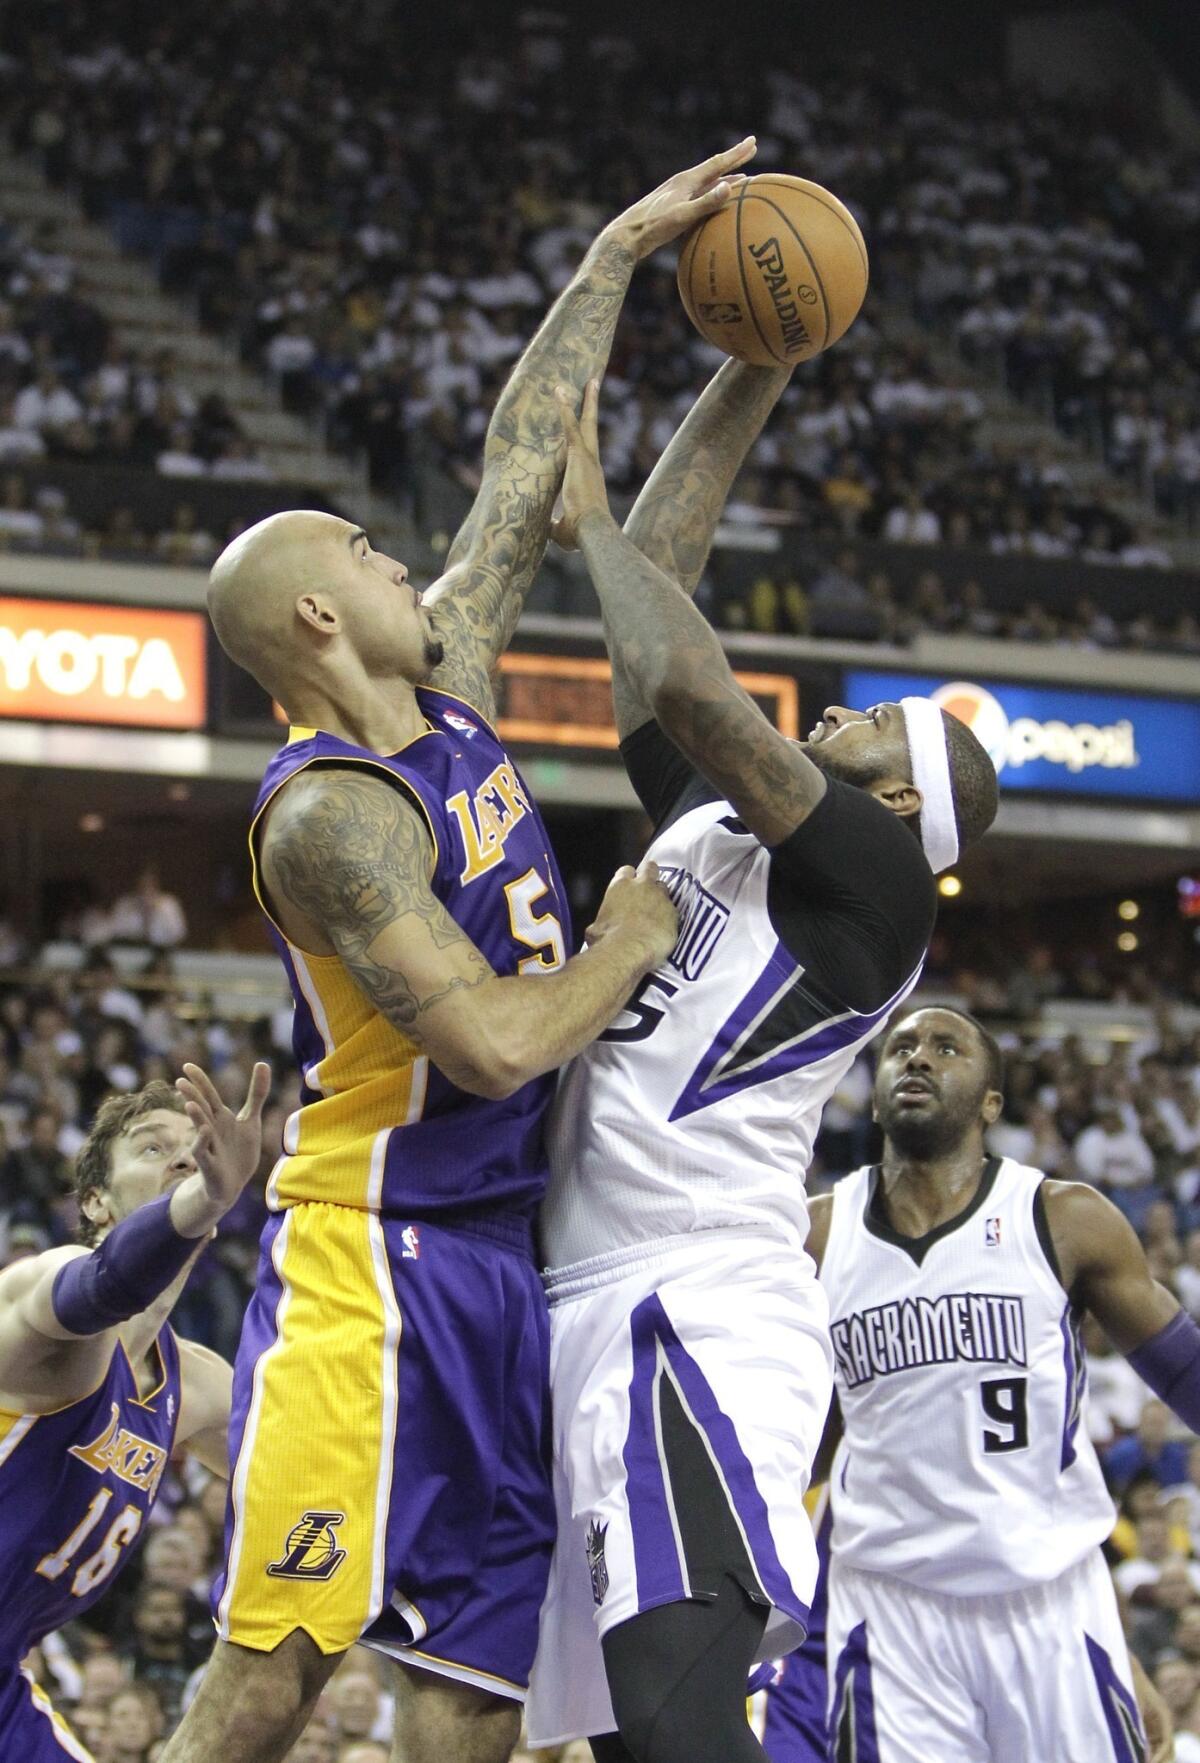 Lakers center Robert Sacre blocks a shot by Kings center DeMarcus Cousins in December.